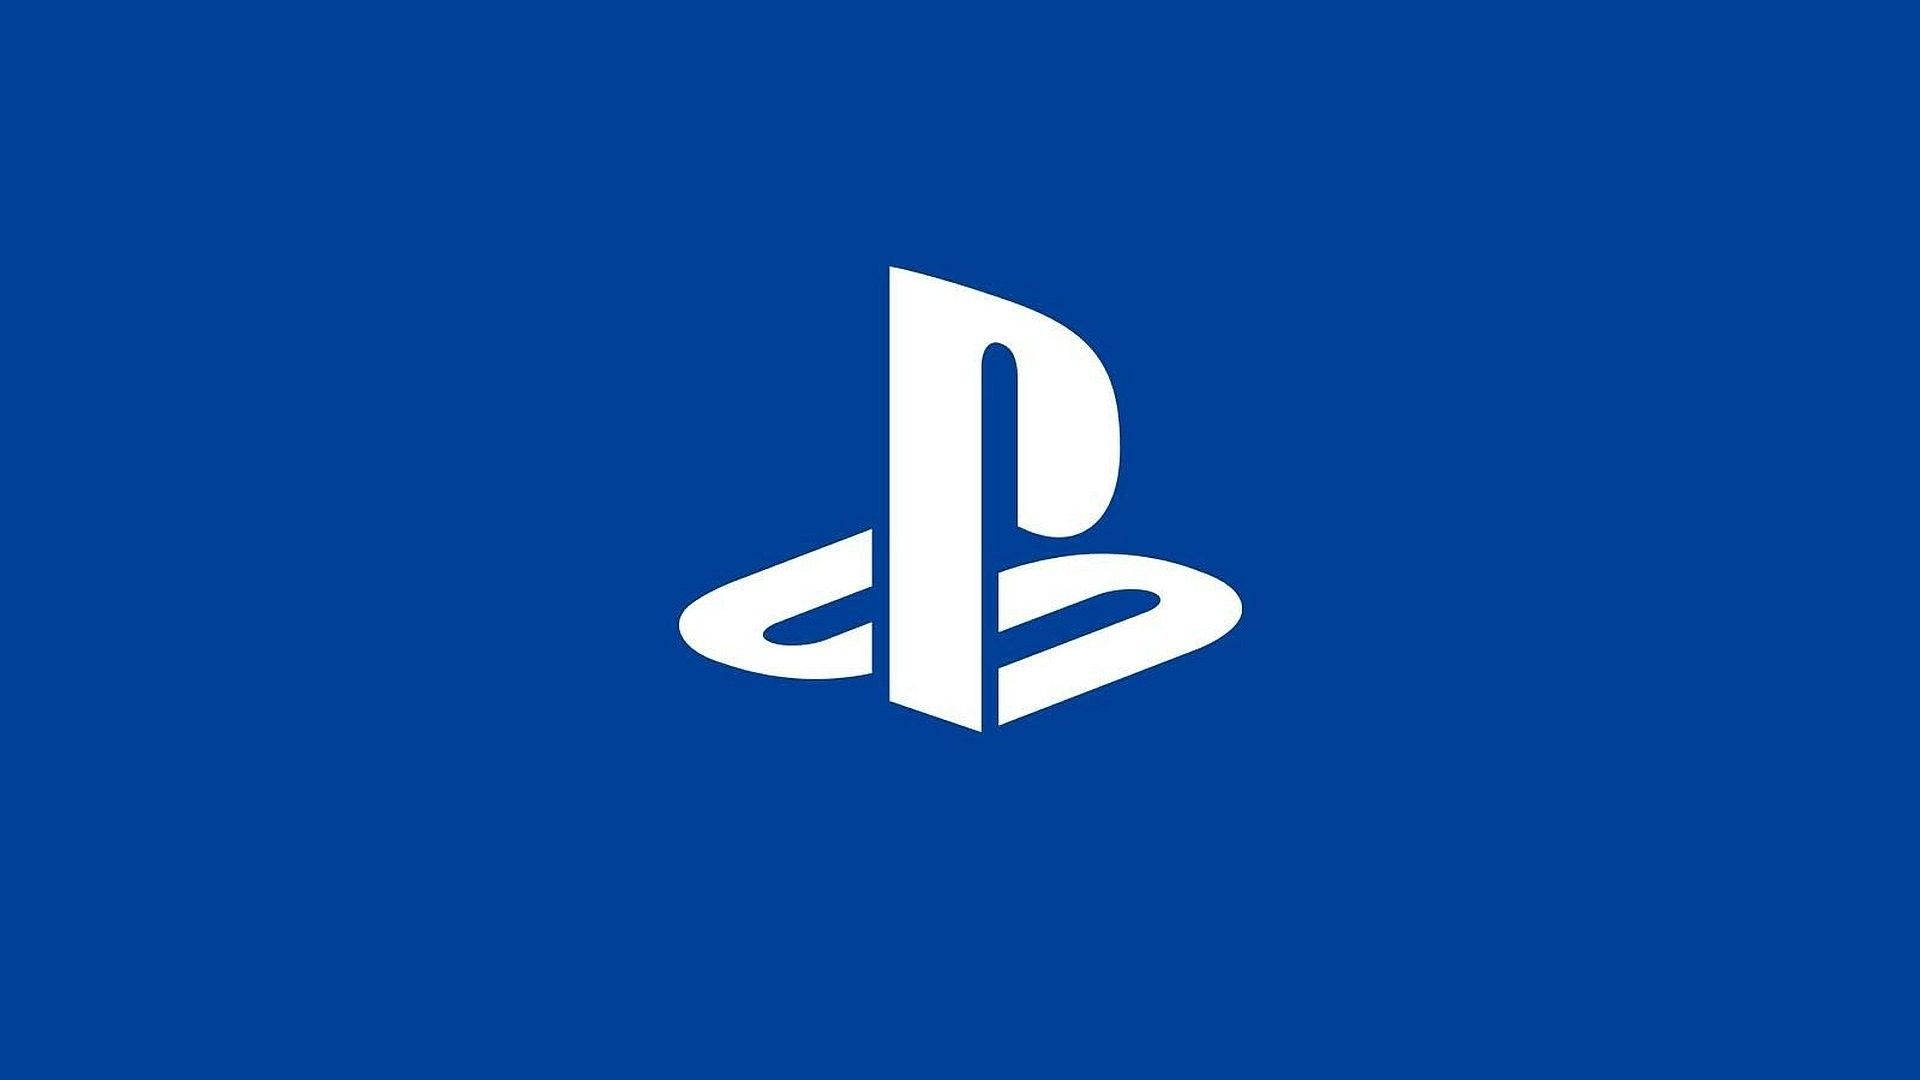 Free Ps4 Wallpaper Downloads, [200+] Ps4 Wallpapers for FREE | Wallpapers .com